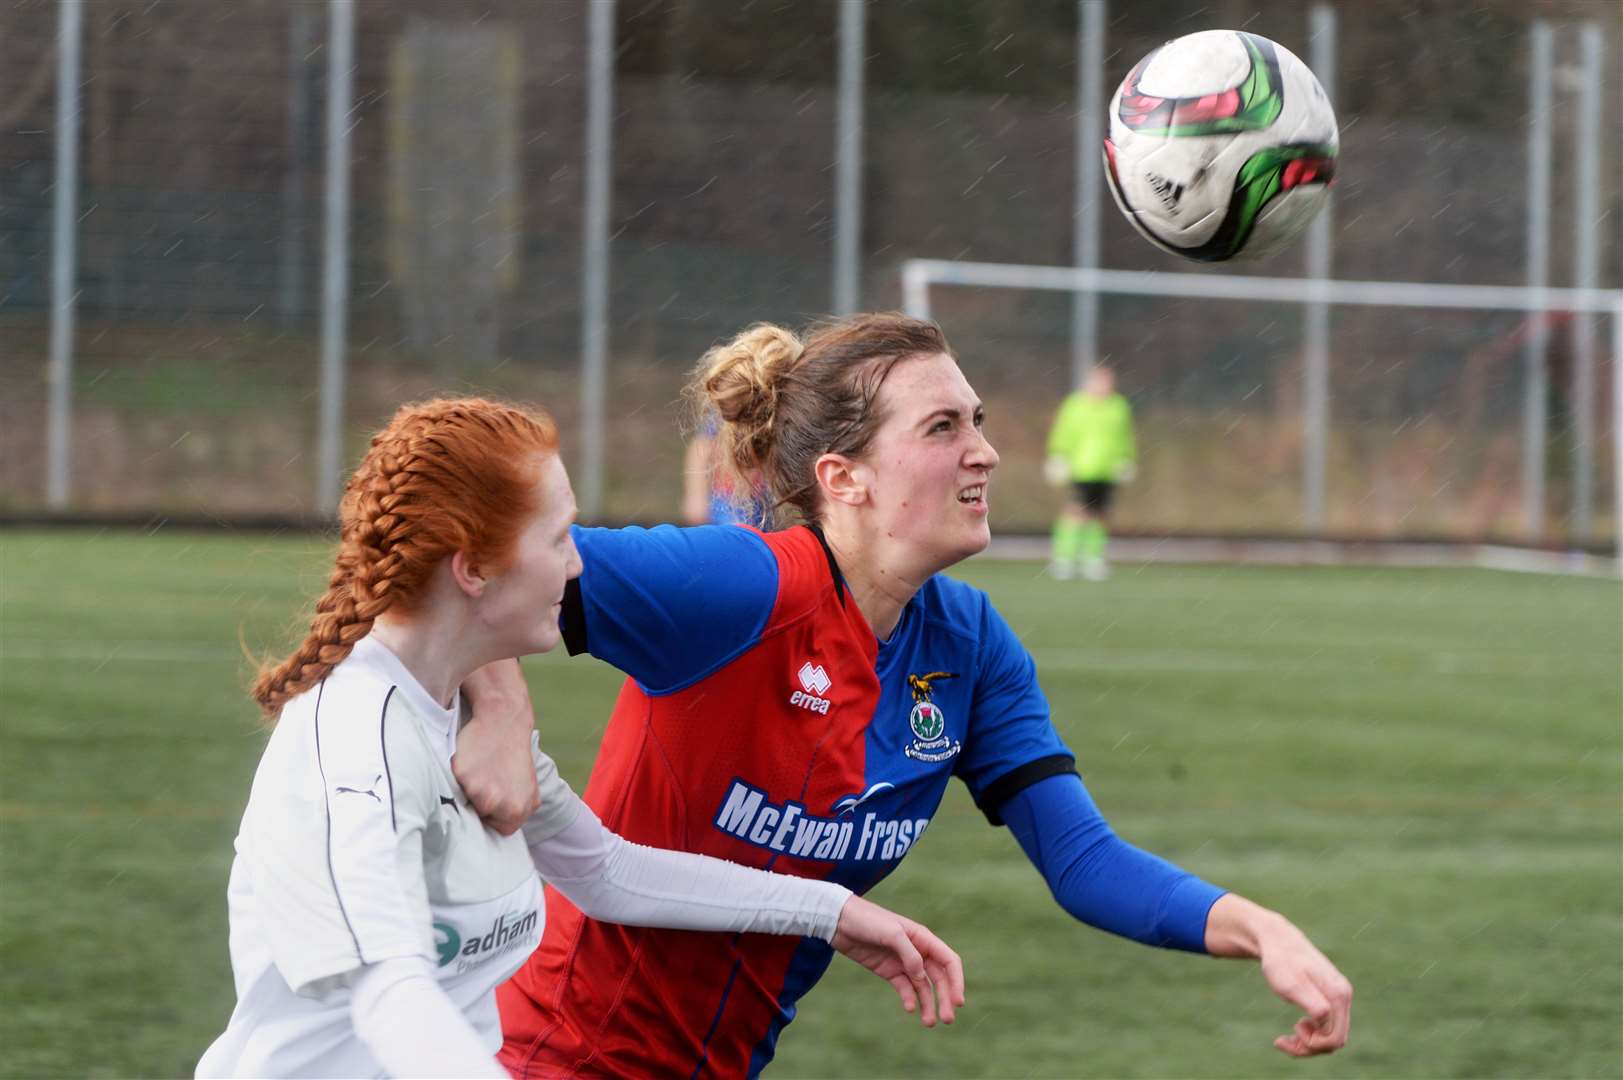 Katie Cleland scored her first goal for ICT since returning from long-term injury.